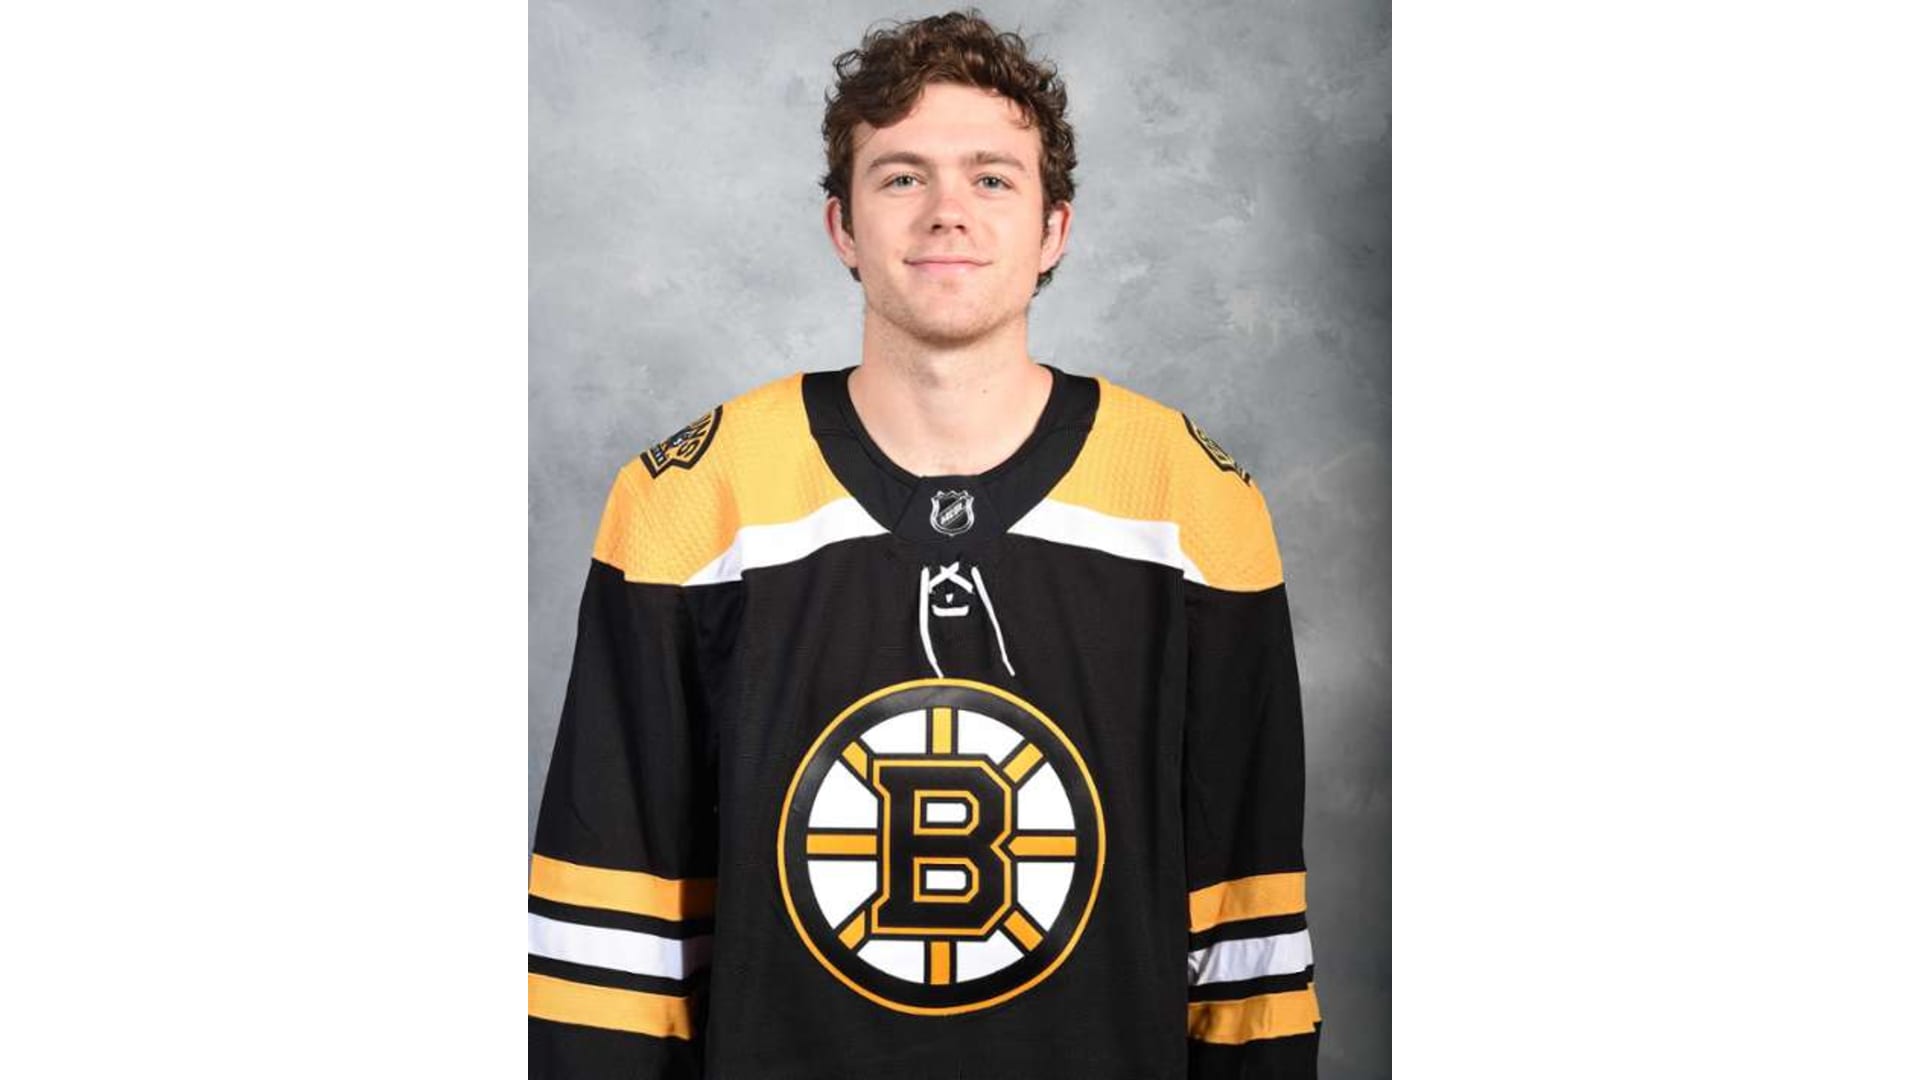 Will Poitras, Lohrei and Beecher MAKE the Bruins NHL roster